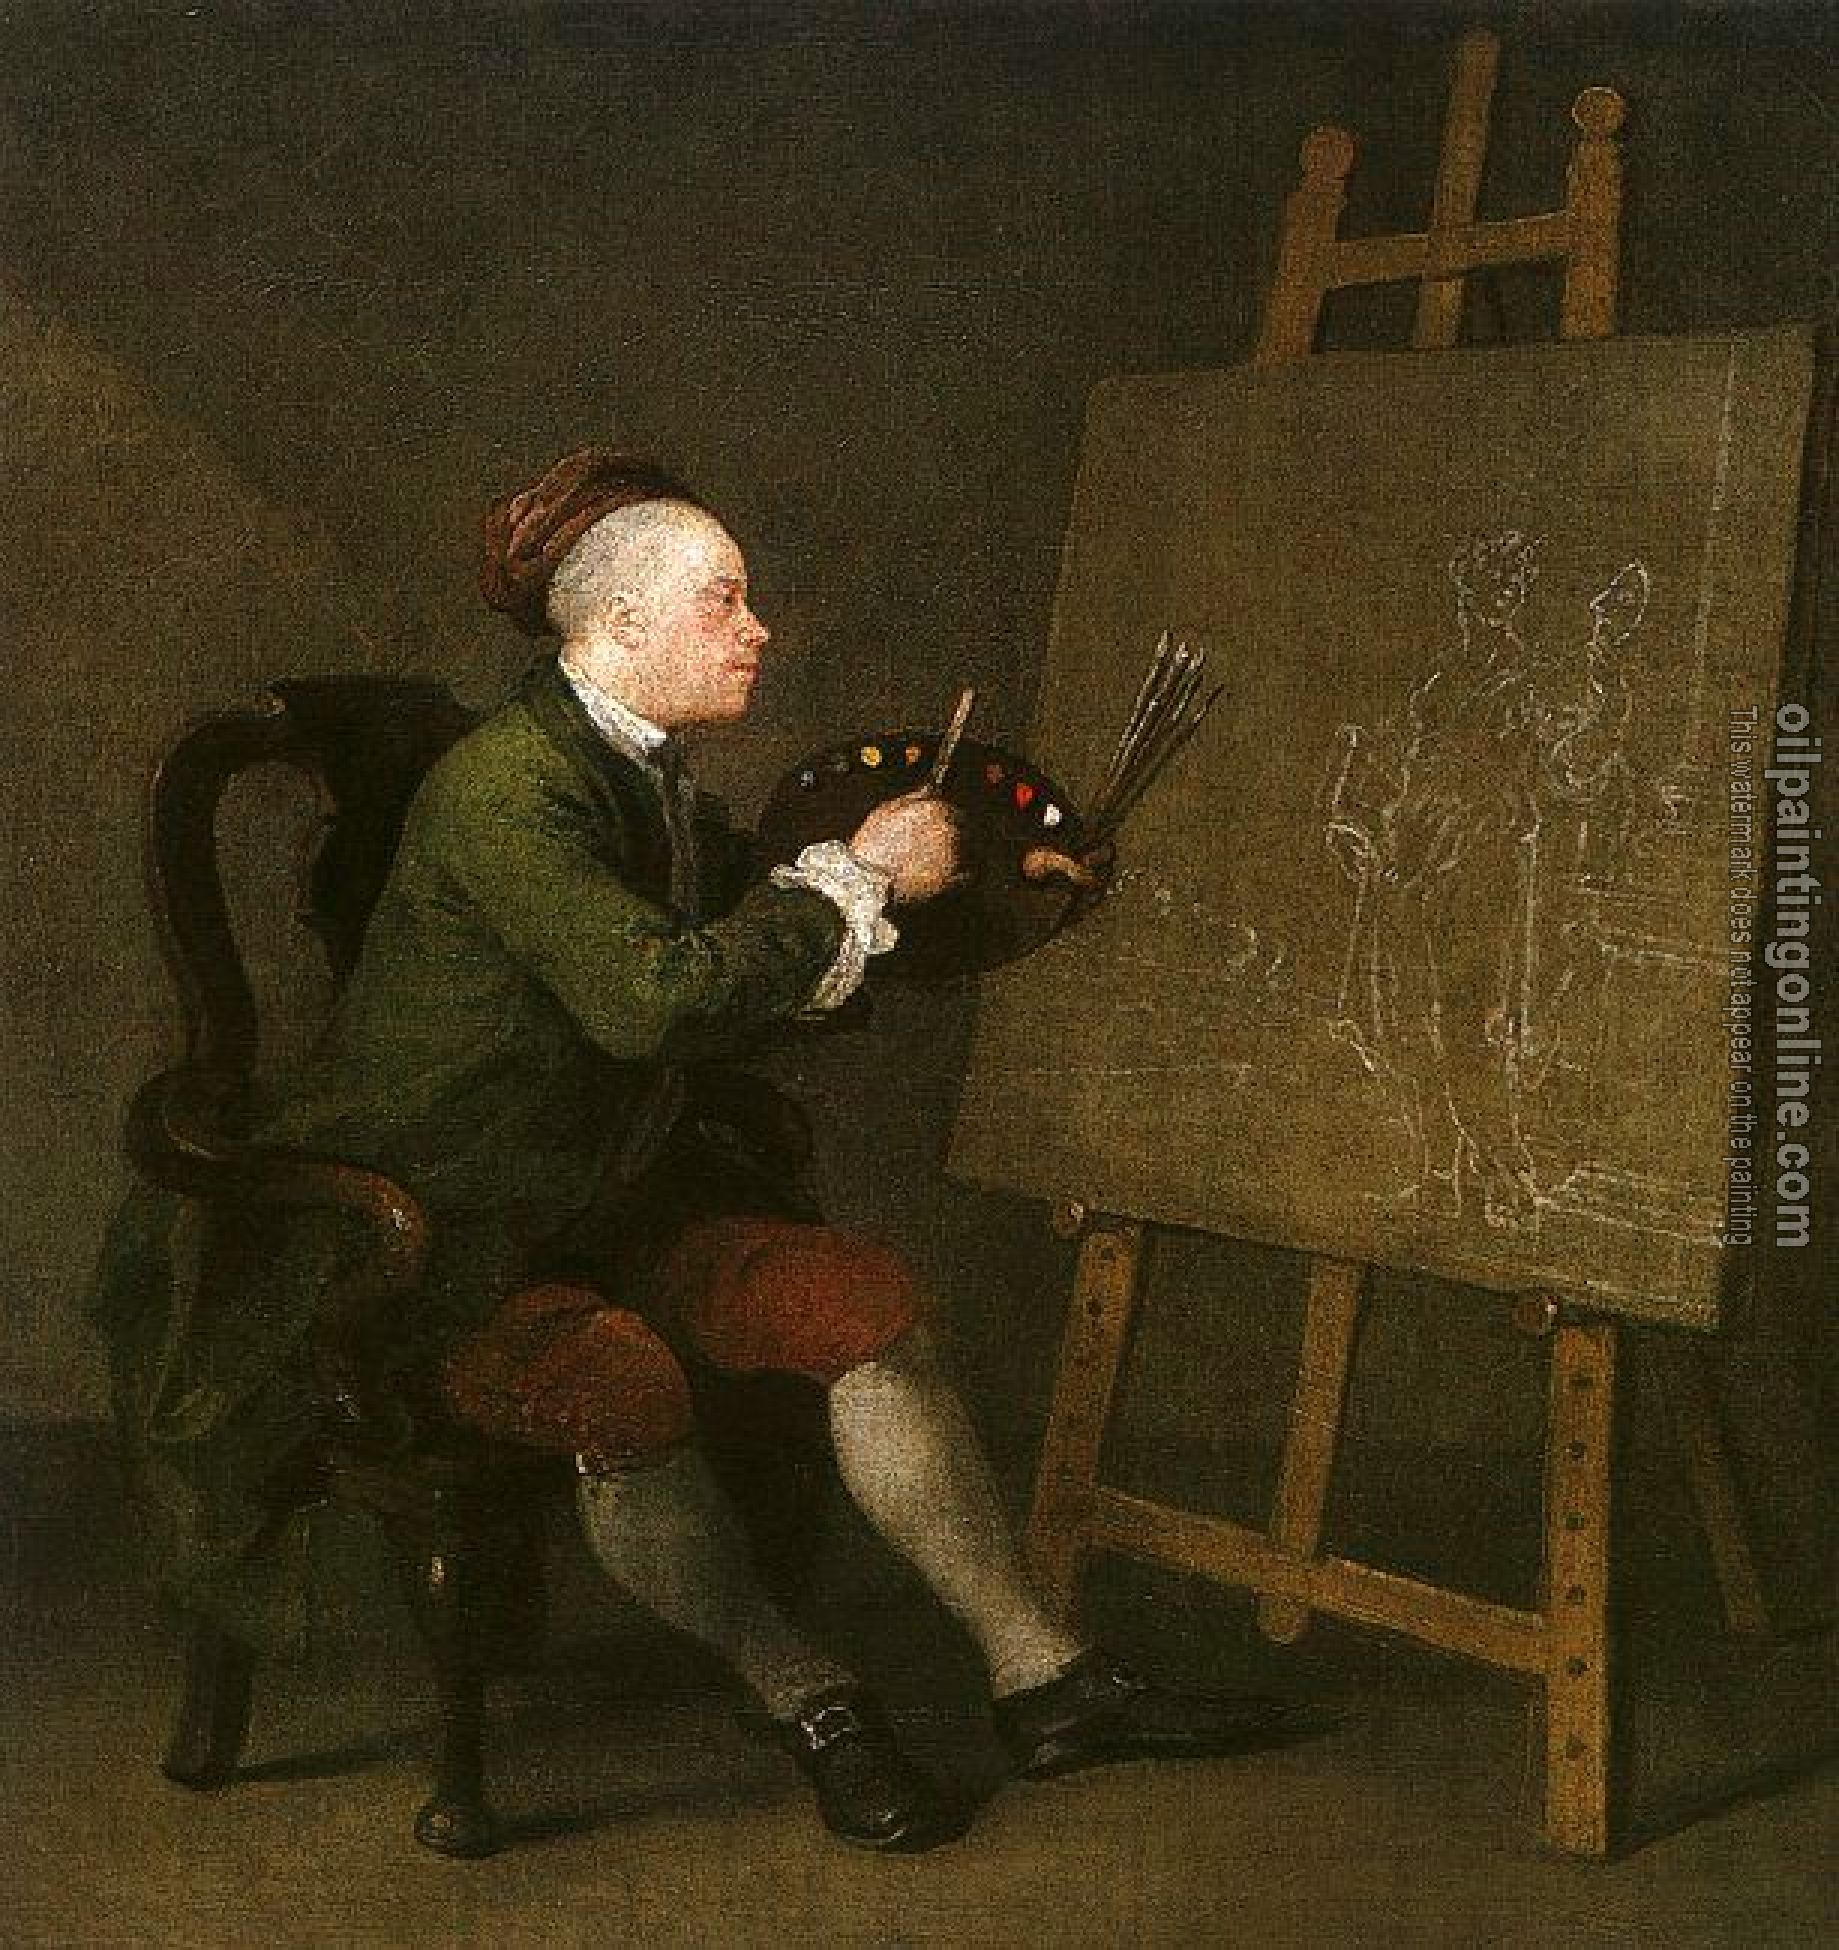 Hogarth, William - Self Portrait at the Easel